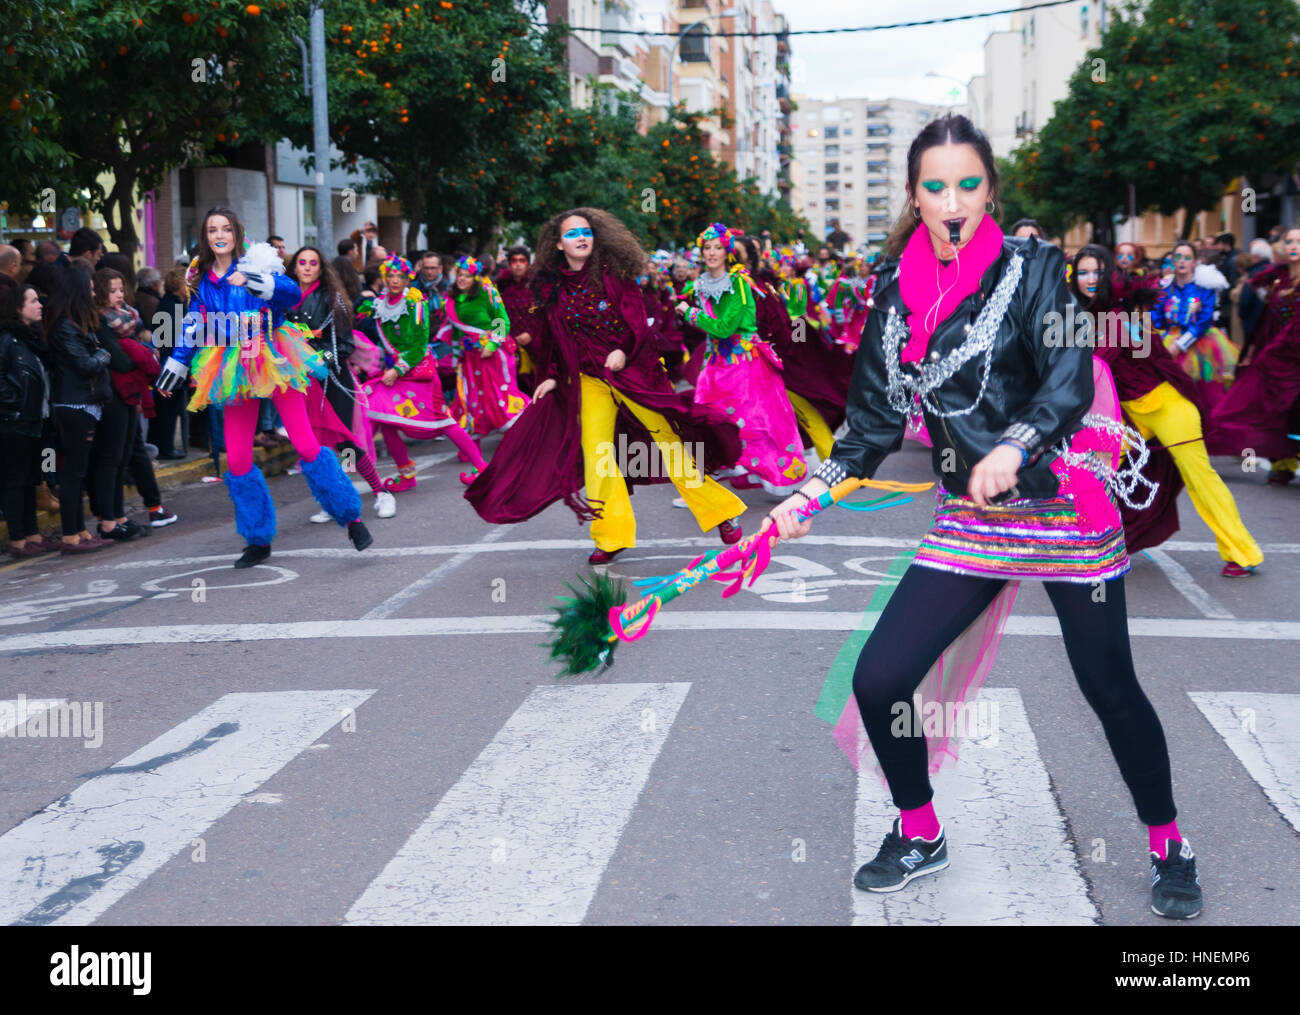 Badajoz, Spain, saturday. February.11. 2017 Participants in colorful costumes take part in the marimanta parade Stock Photo